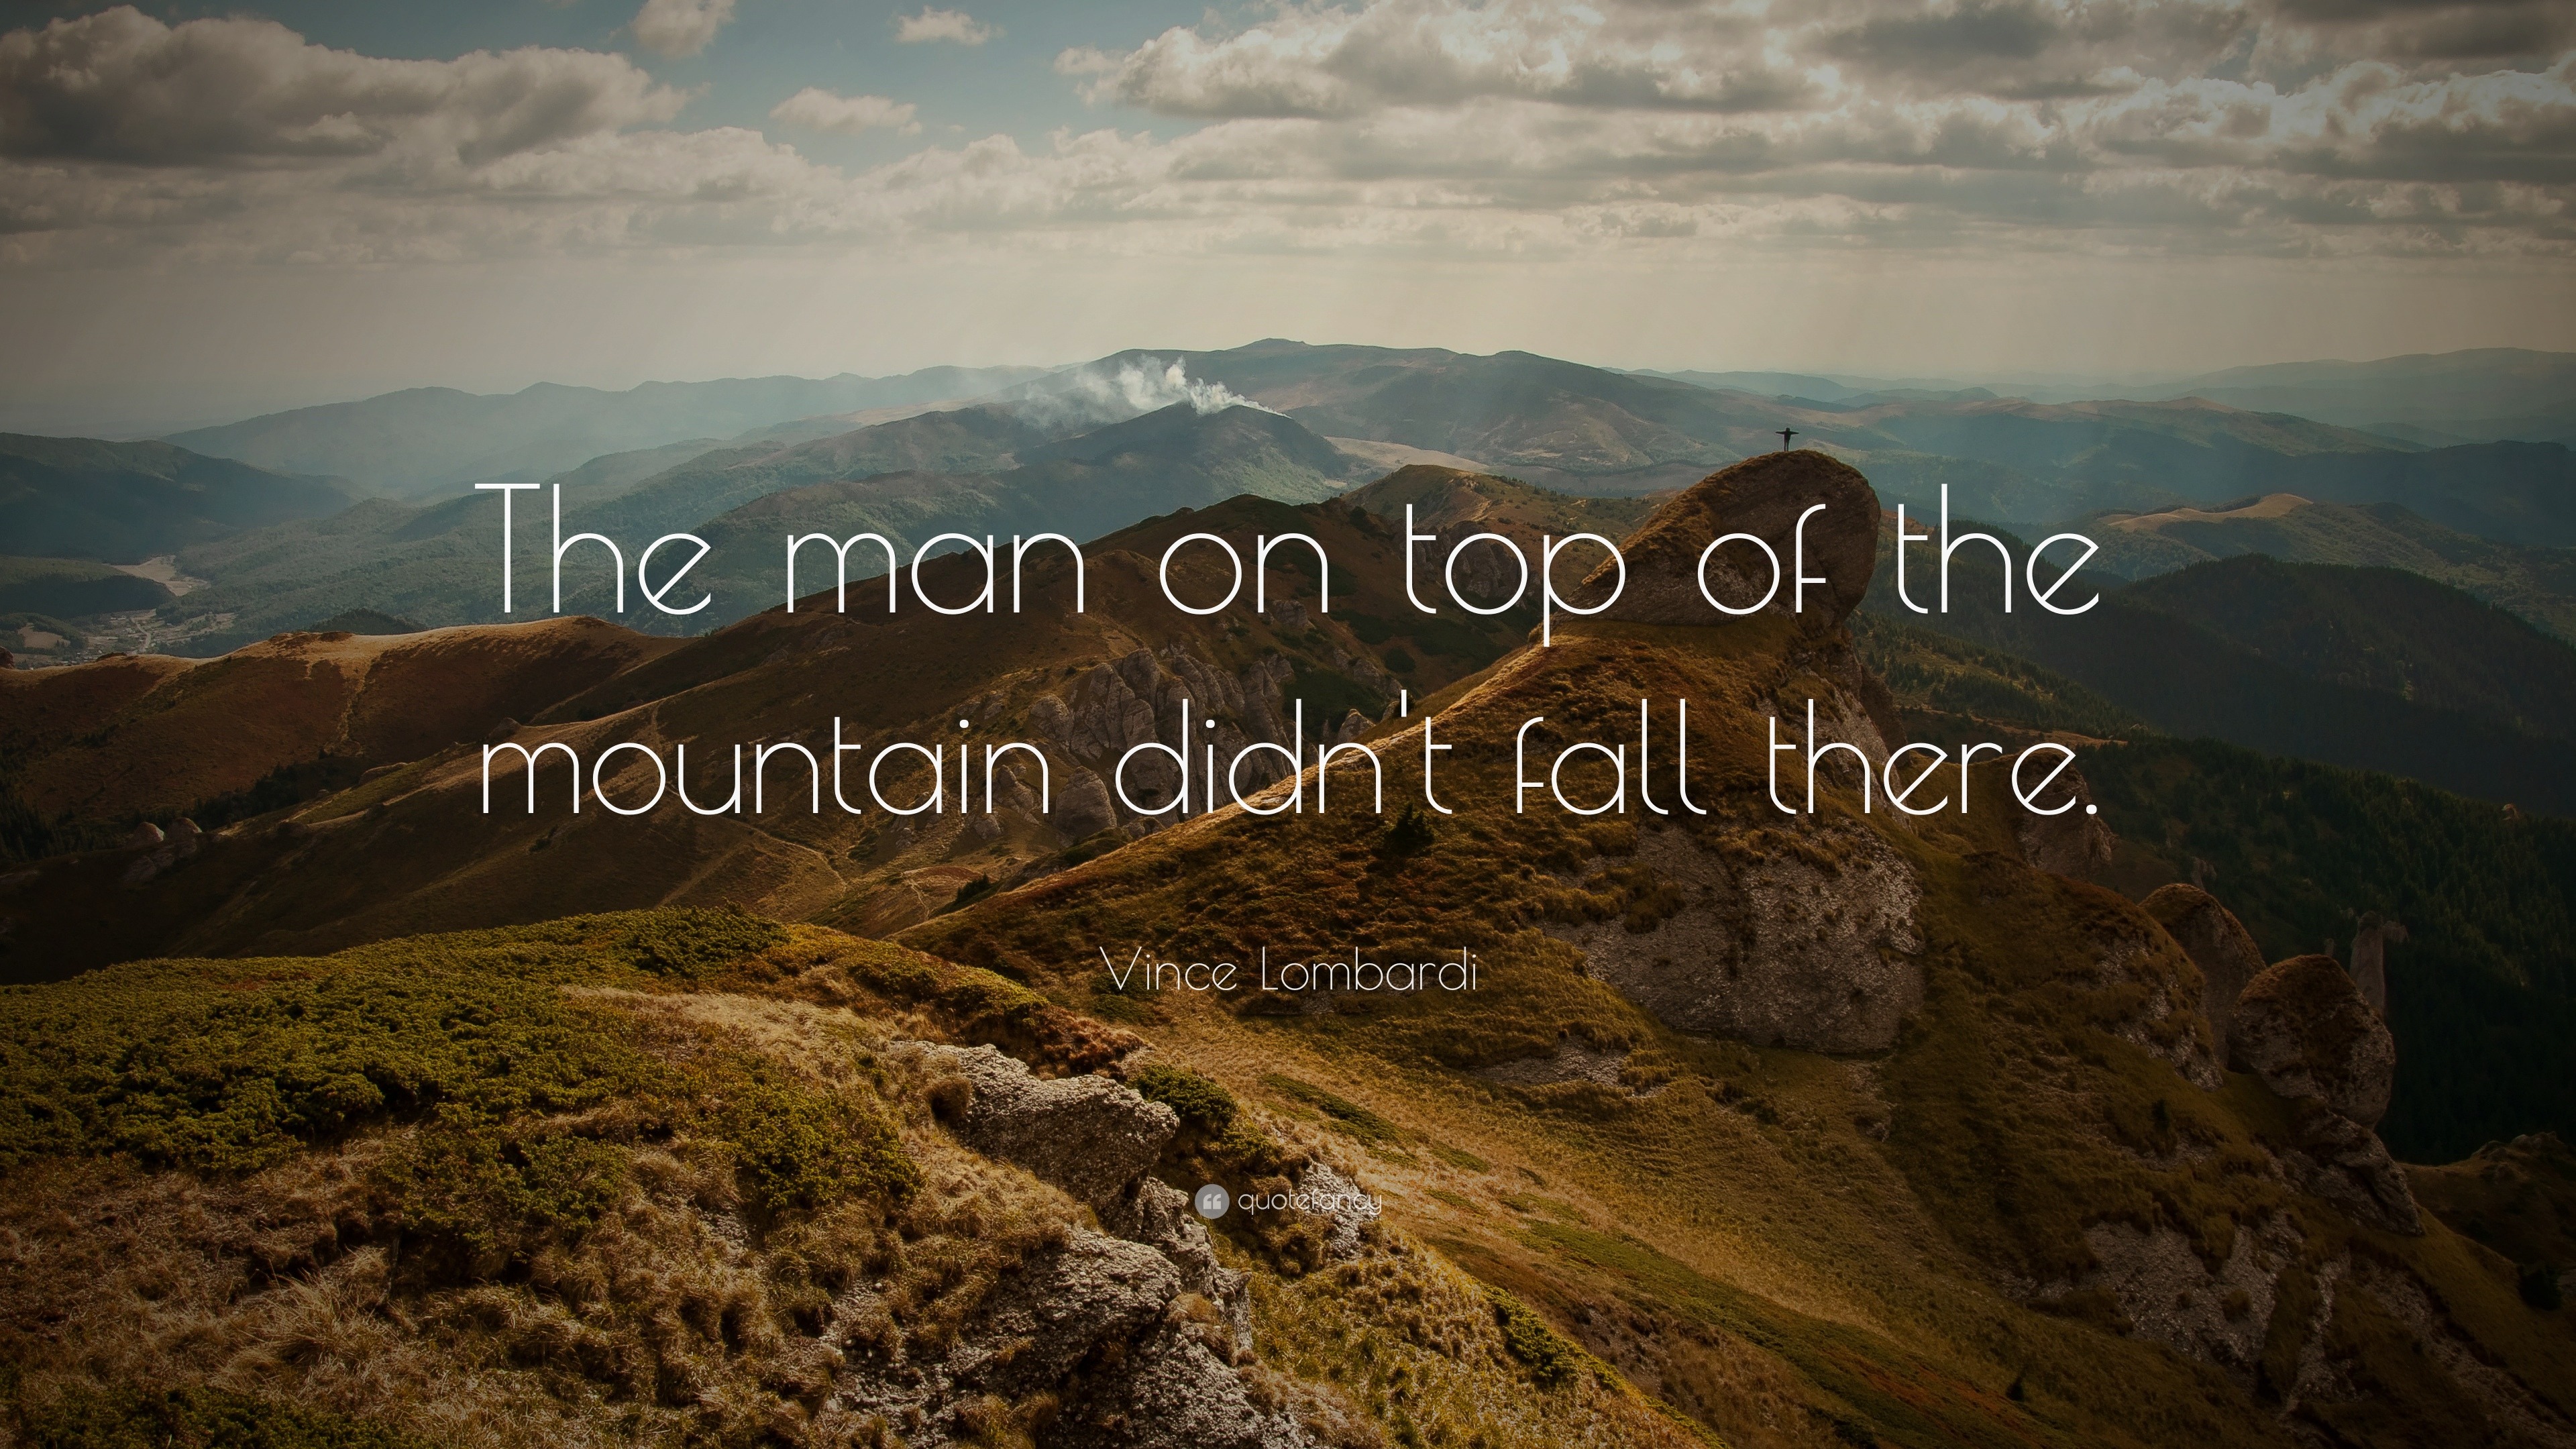 Vince Lombardi Quote The Man On Top Of The Mountain Didn T Fall There